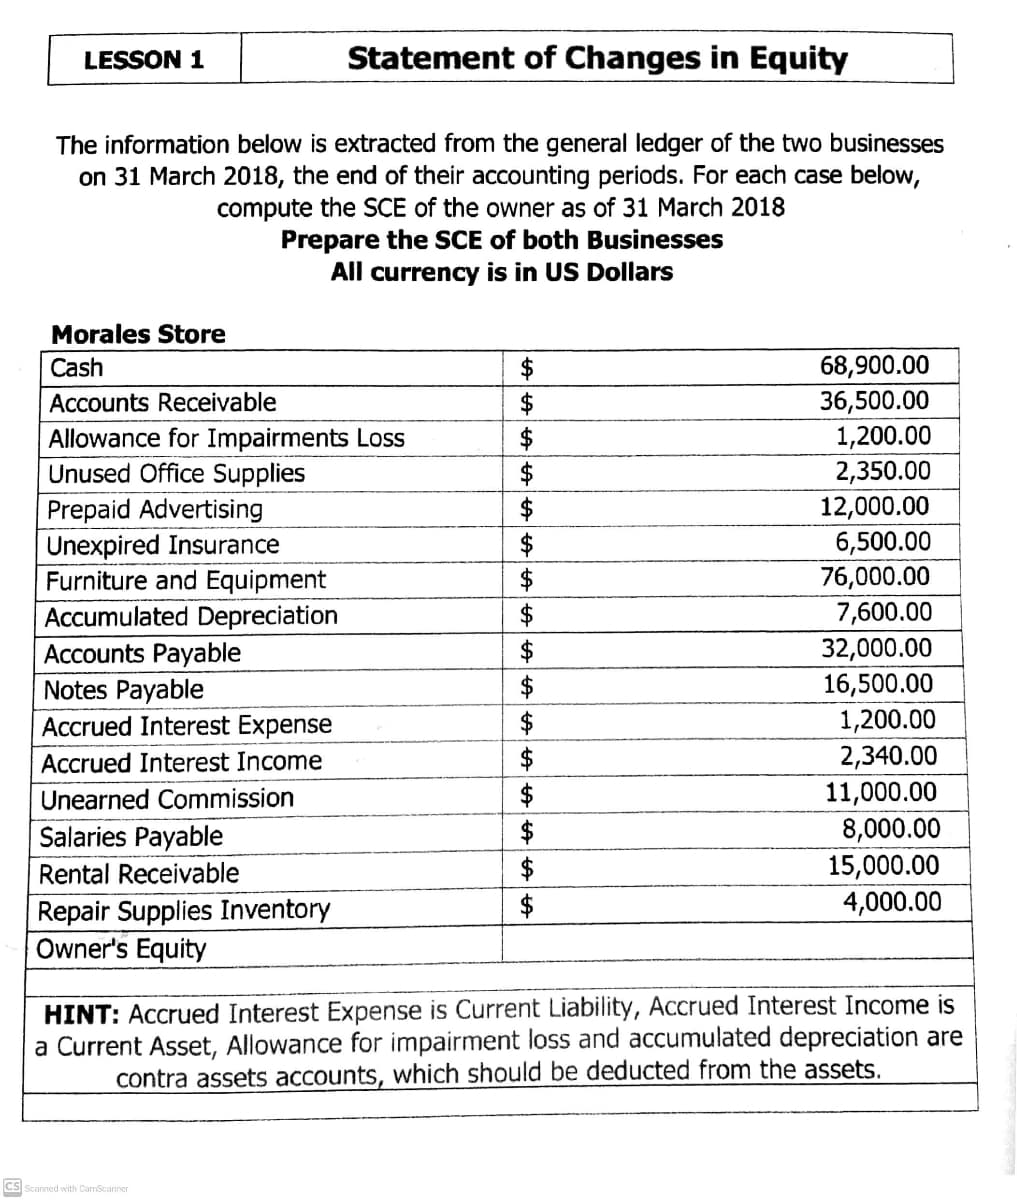 LESSON 1
Statement of Changes in Equity
The information below is extracted from the general ledger of the two businesses
on 31 March 2018, the end of their accounting periods. For each case below,
compute the SCE of the owner as of 31 March 2018
Prepare the SCE of both Businesses
All currency is in US Dollars
Morales Store
$
$
68,900.00
36,500.00
Cash
Accounts Receivable
Allowance for Impairments Loss
Unused Office Supplies
1,200.00
$
$
$
2,350.00
12,000.00
6,500.00
Prepaid Advertising
Unexpired Insurance
Furniture and Equipment
Accumulated Depreciation
Accounts Payable
Notes Payable
76,000.00
7,600.00
$
$
$
$
$
$
32,000.00
16,500.00
1,200.00
2,340.00
Accrued Interest Expense
Accrued Interest Income
11,000.00
8,000.00
15,000.00
4,000.00
Unearned Commission
Salaries Payable
$
Rental Receivable
$
$
Repair Supplies Inventory
Owner's Equity
HINT: Accrued Interest Expense is Current Liability, Accrued Interest Income is
a Current Asset, Allowance for impairment loss and accumulated depreciation are
contra assets accounts, which should be deducted from the assets.
CS Scanned with CamScanner
